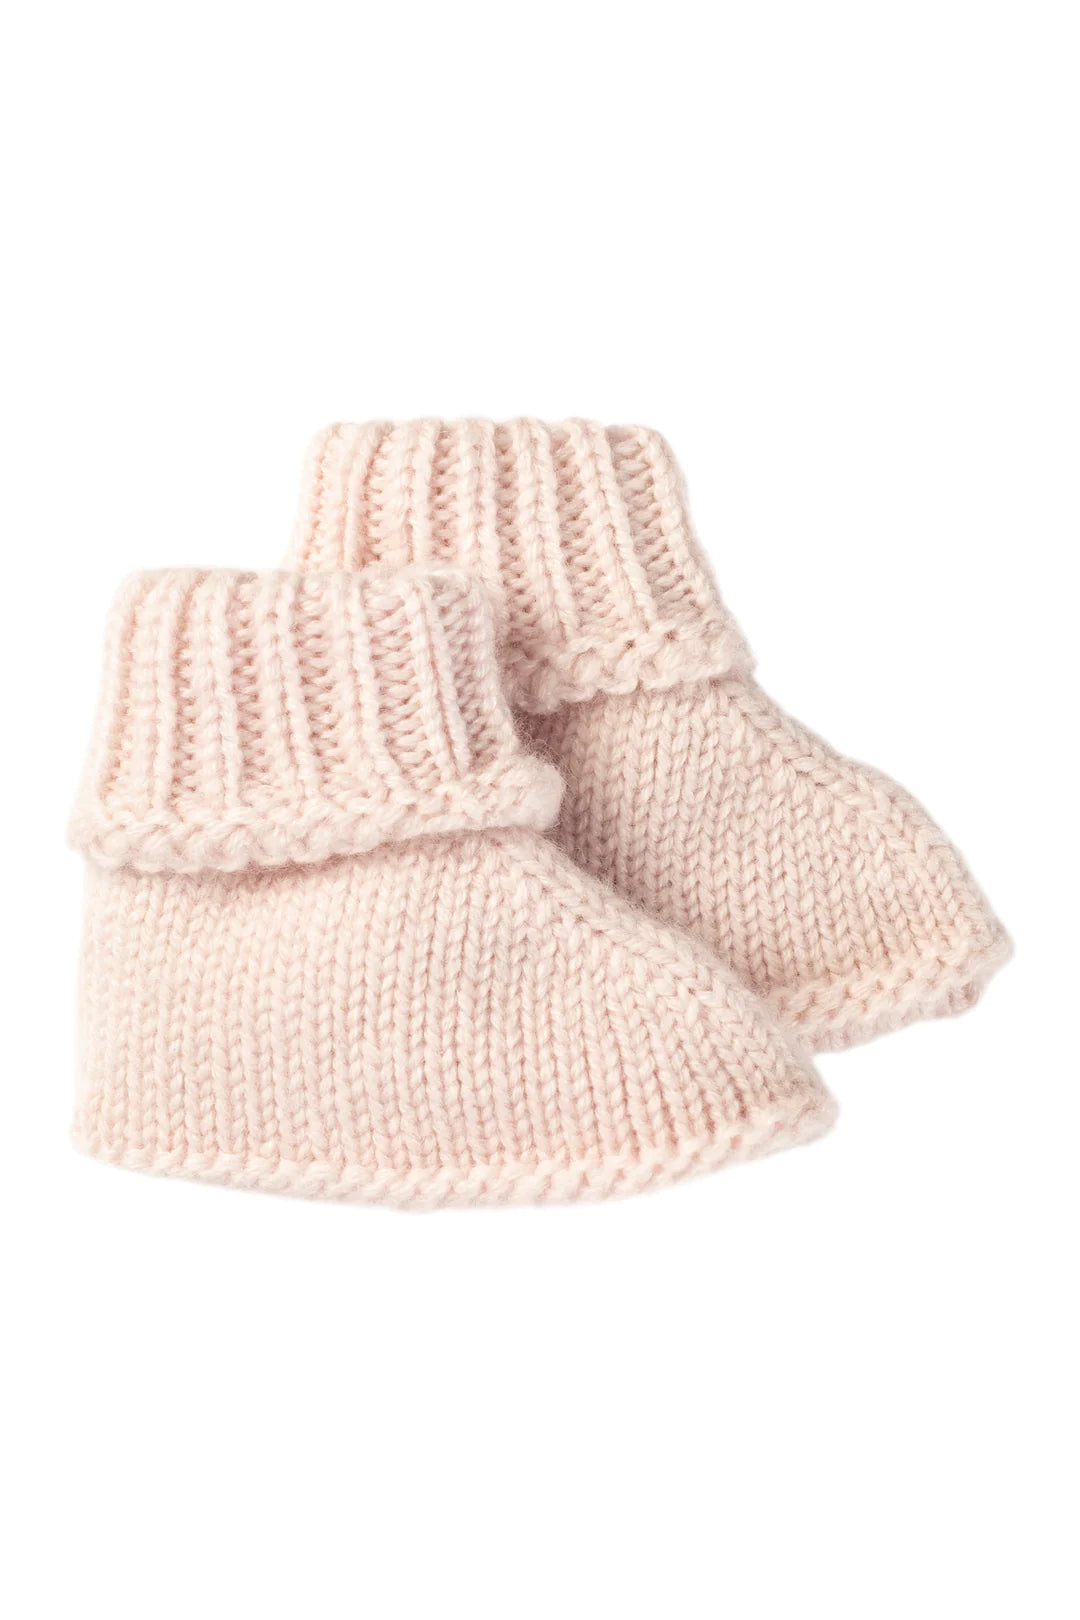 Soft pink cashmere baby booties